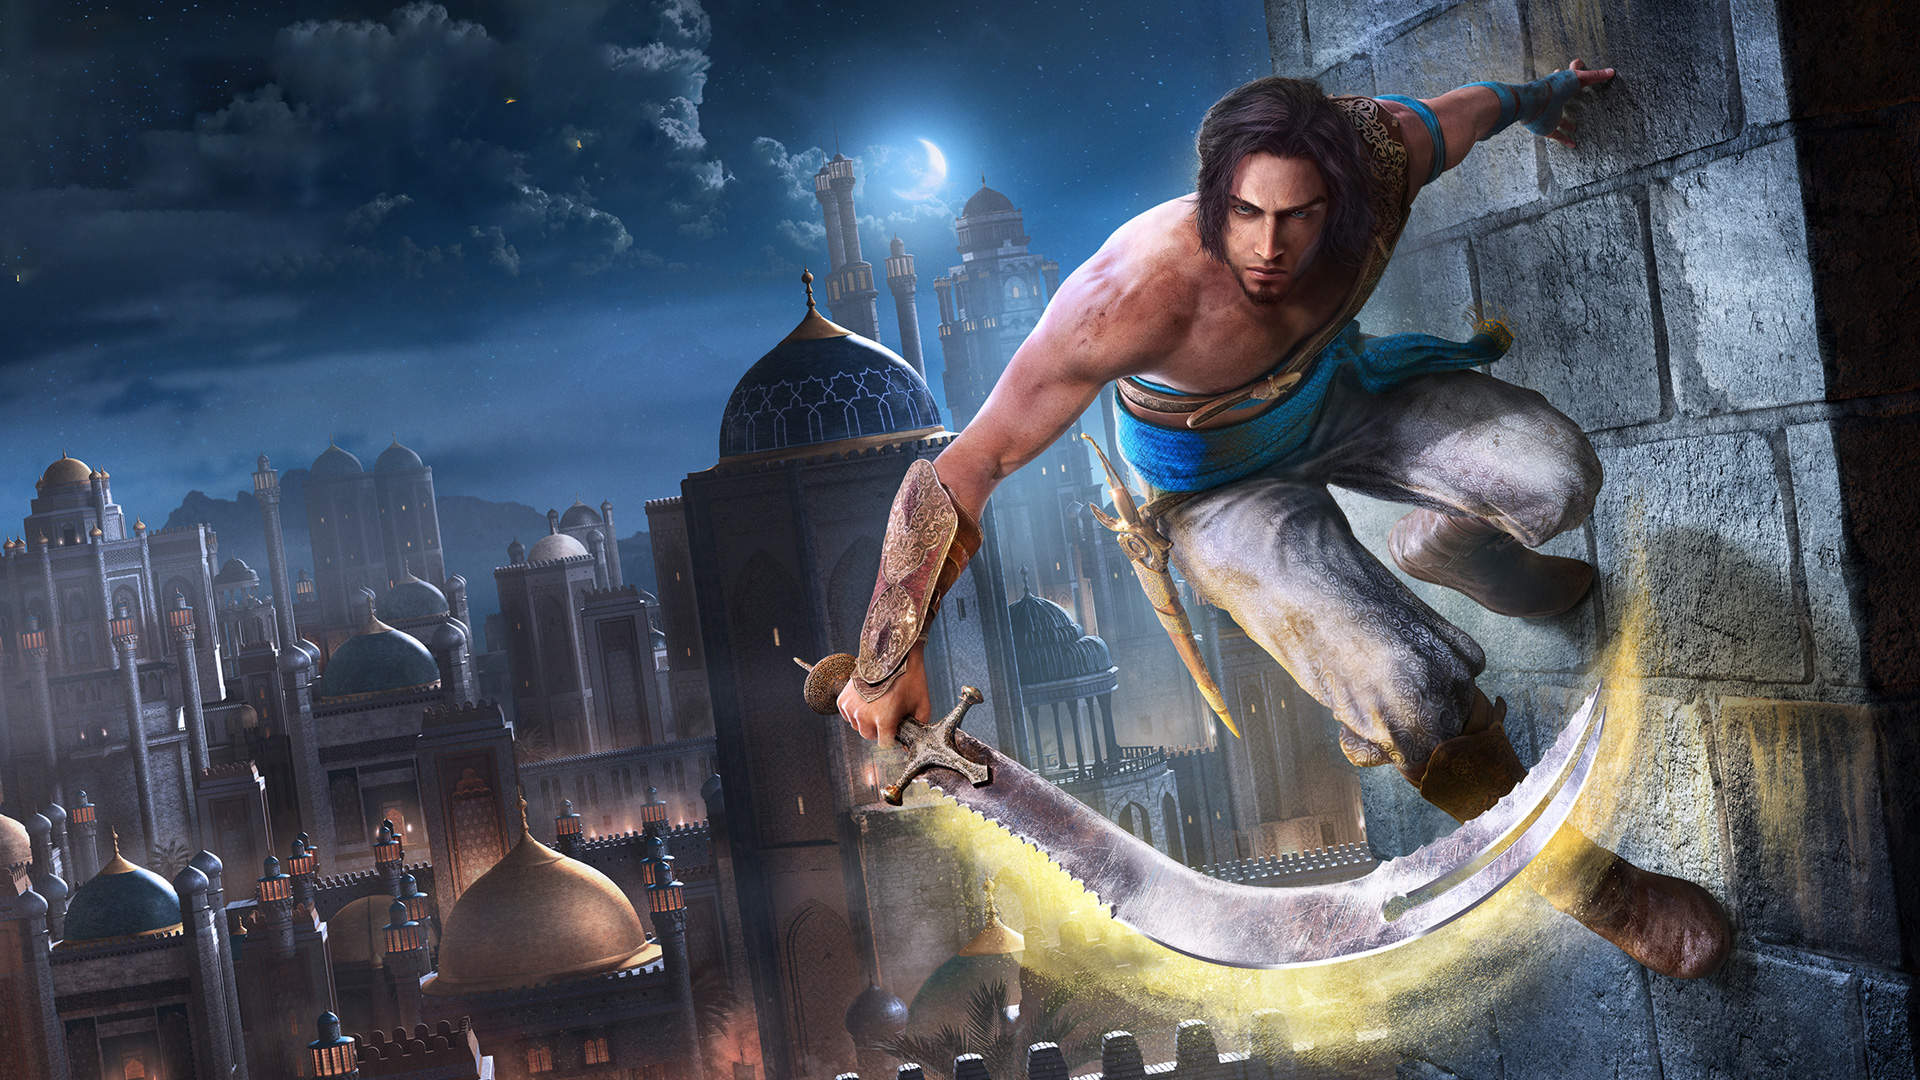 prince of persia sands of time 2 trainer